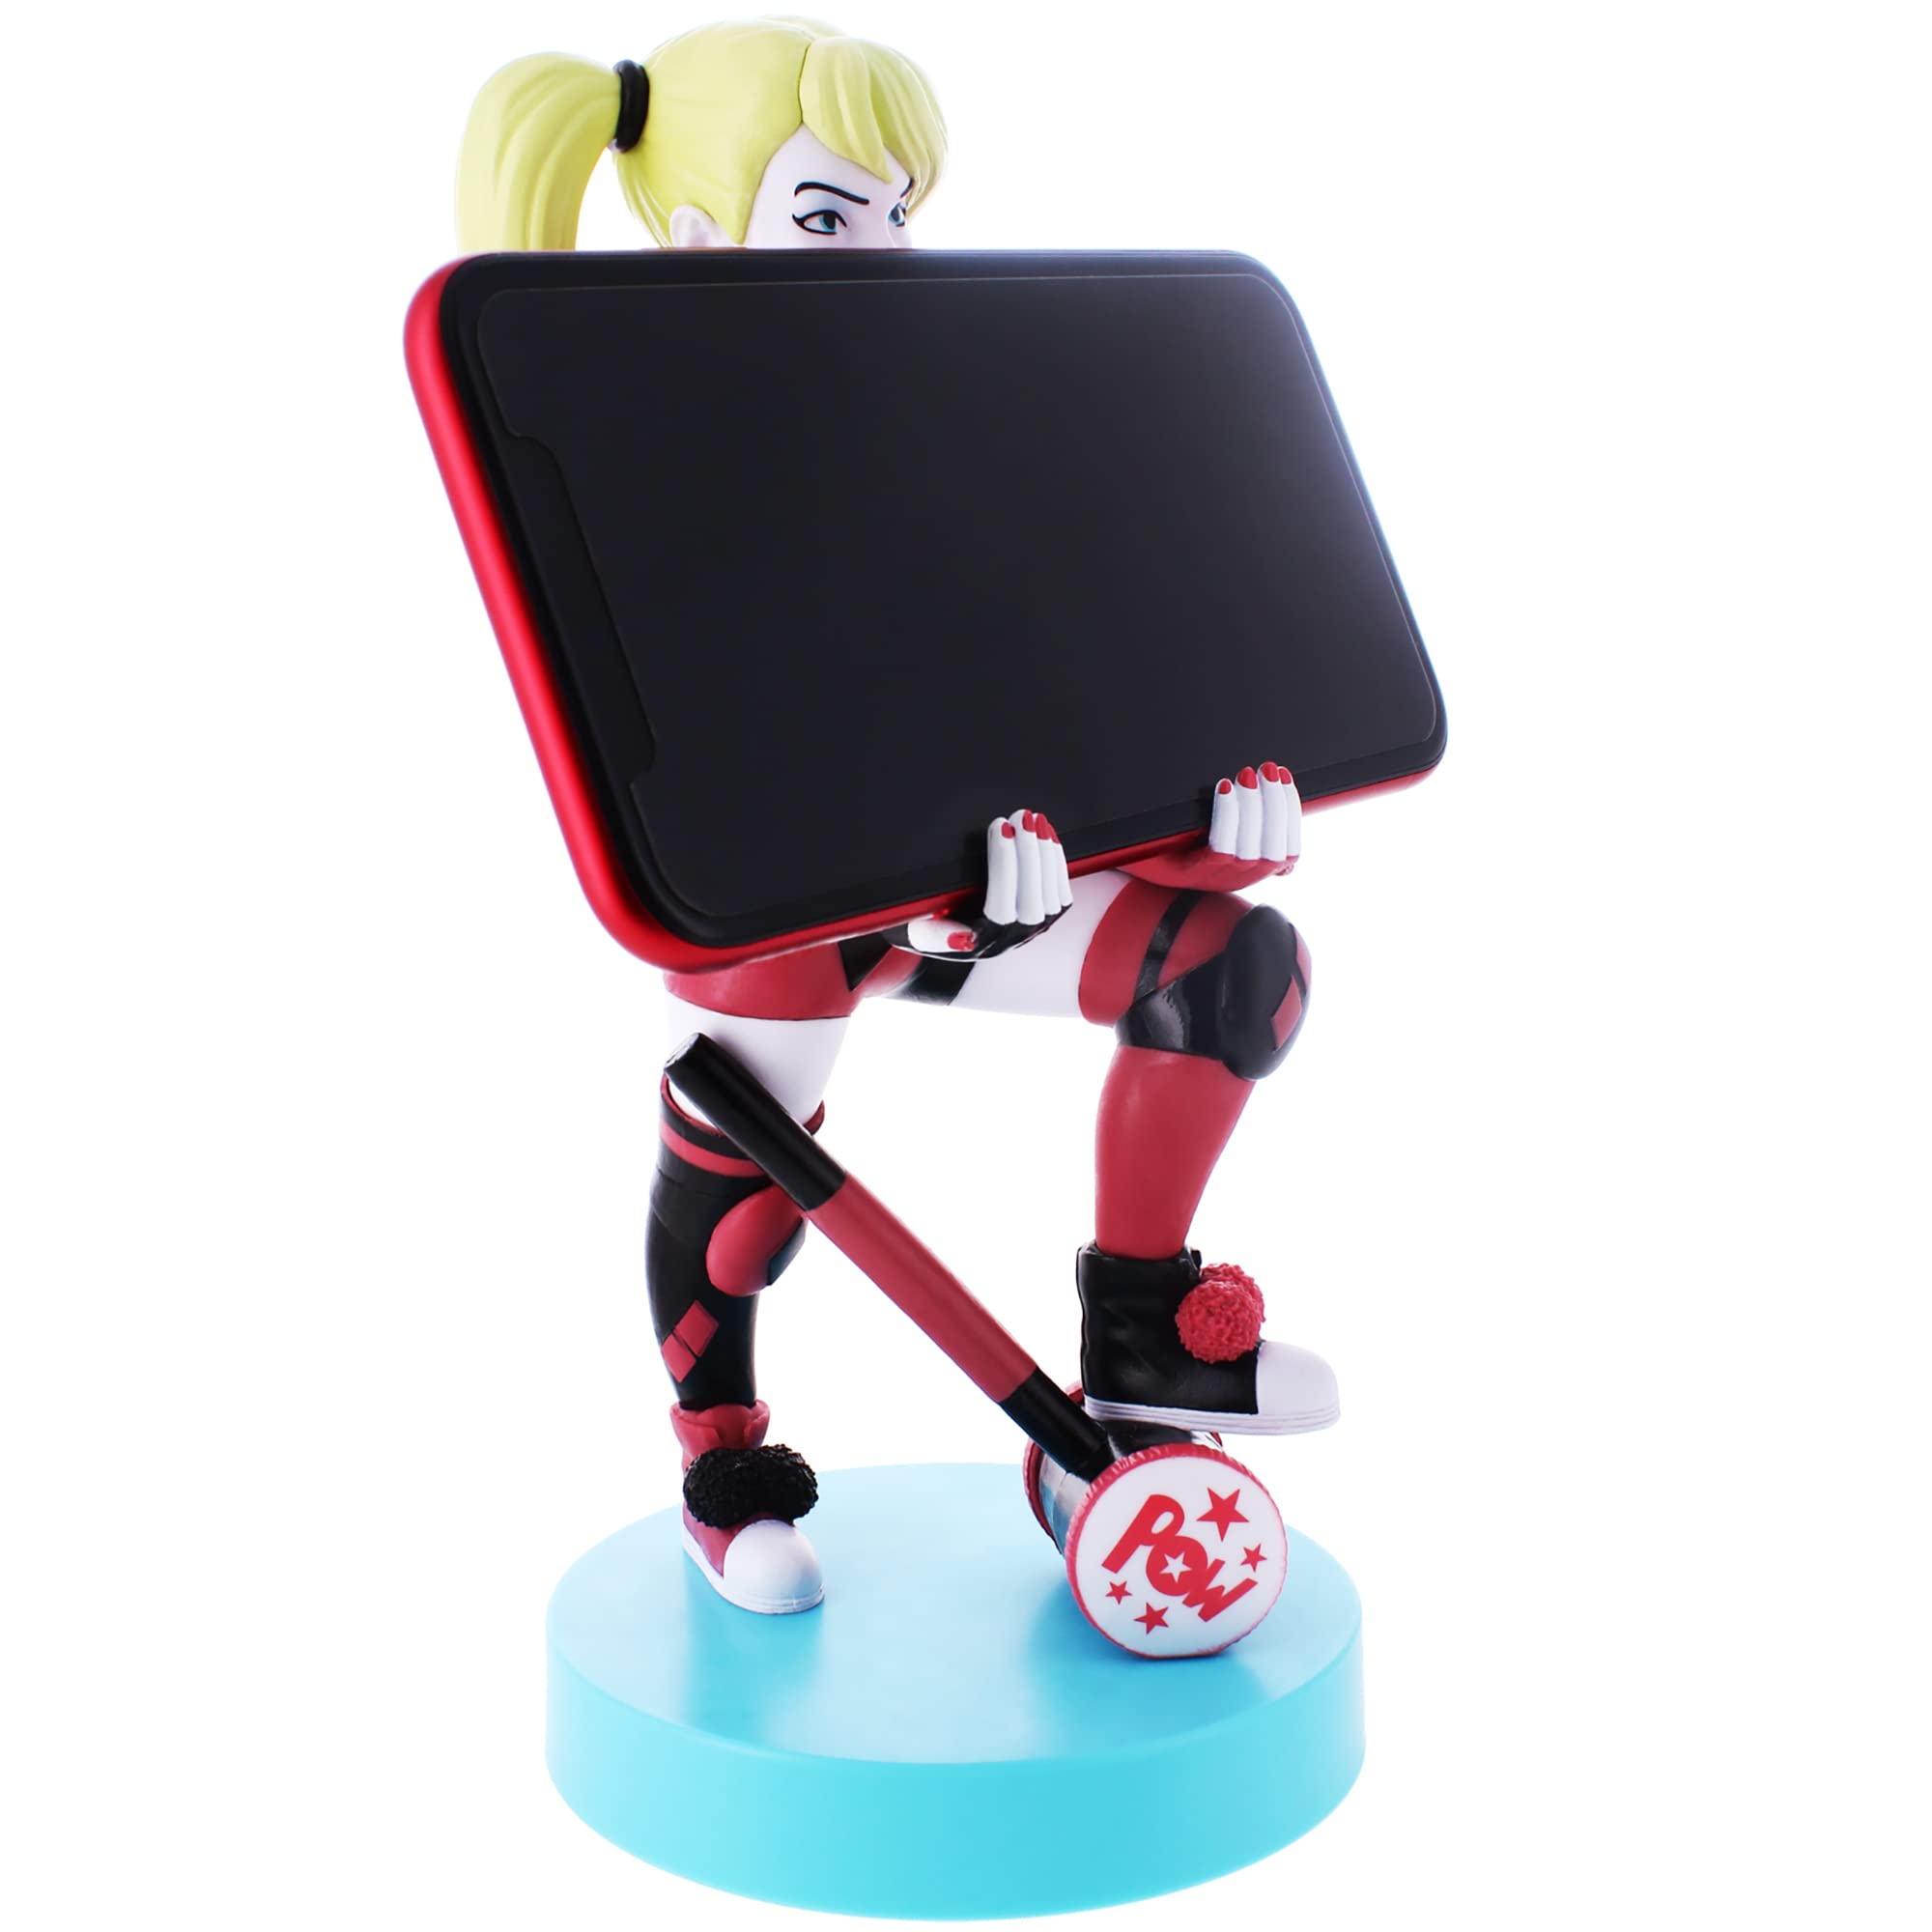 Cable Guys Charging Phone & Controller Holder: DC Comics - Harley Quinn, 8